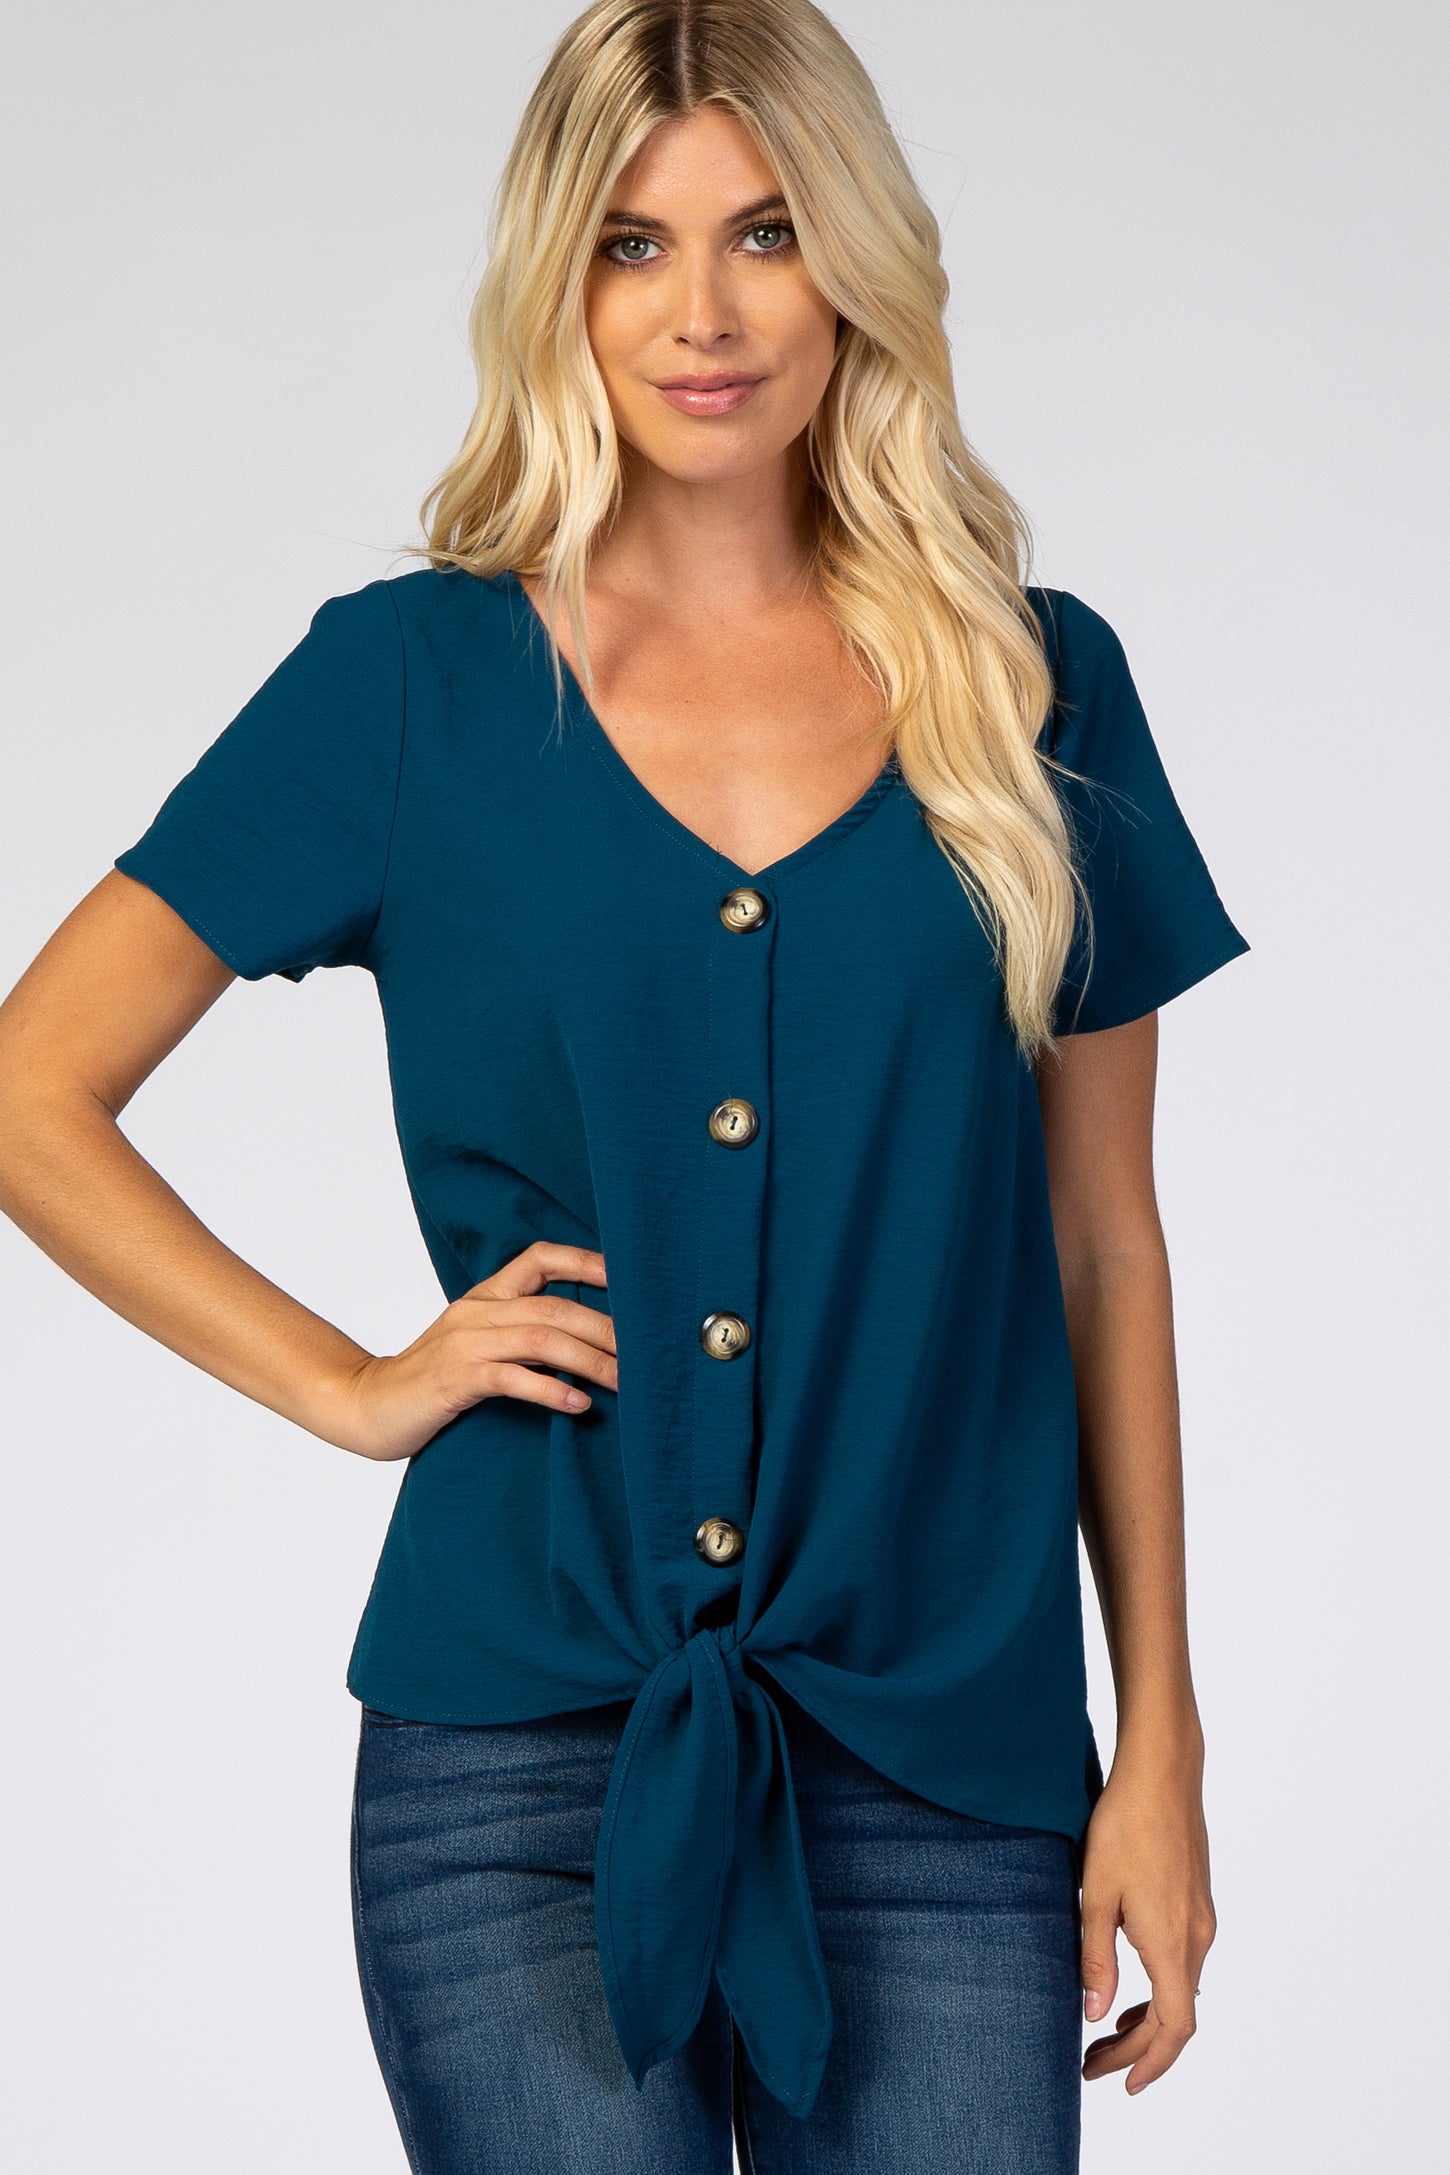 Teal Button Tie Front Top– PinkBlush